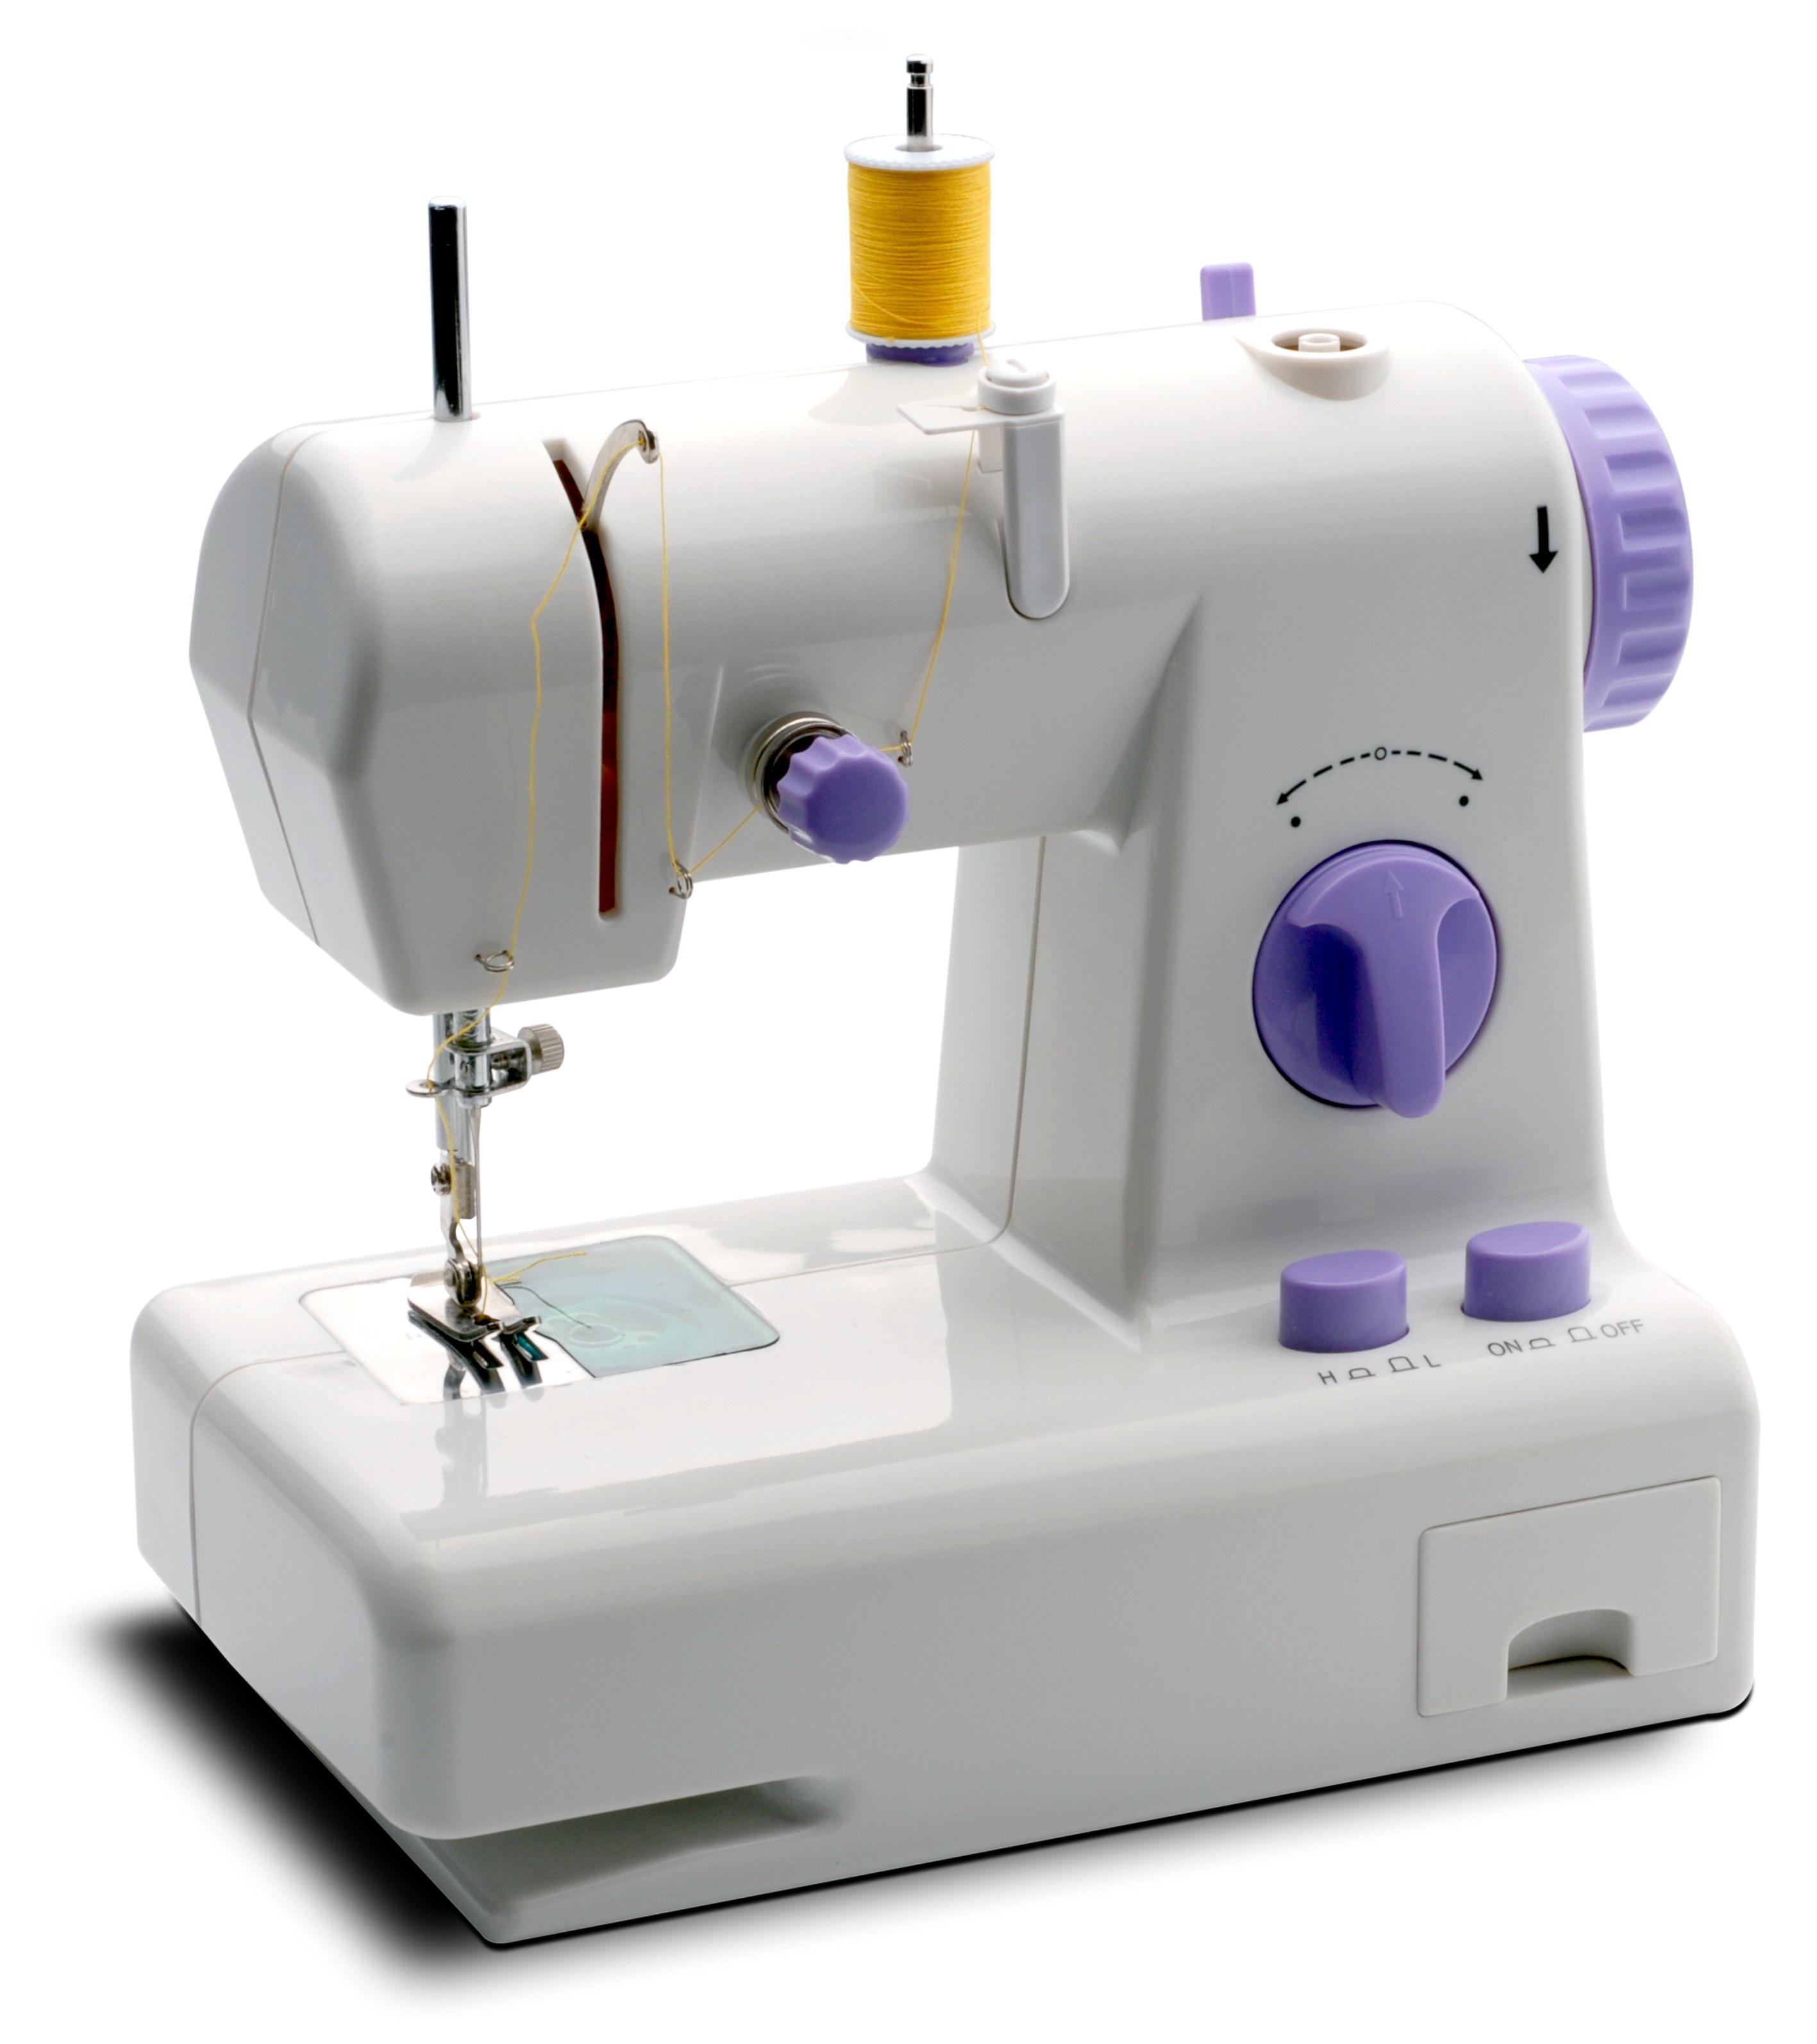 Quilting Curtain Sewing Machine for Elastic Attachment, High Quality Quilting Sewing Machine, Quilting Sewing Machine Fhsm-208